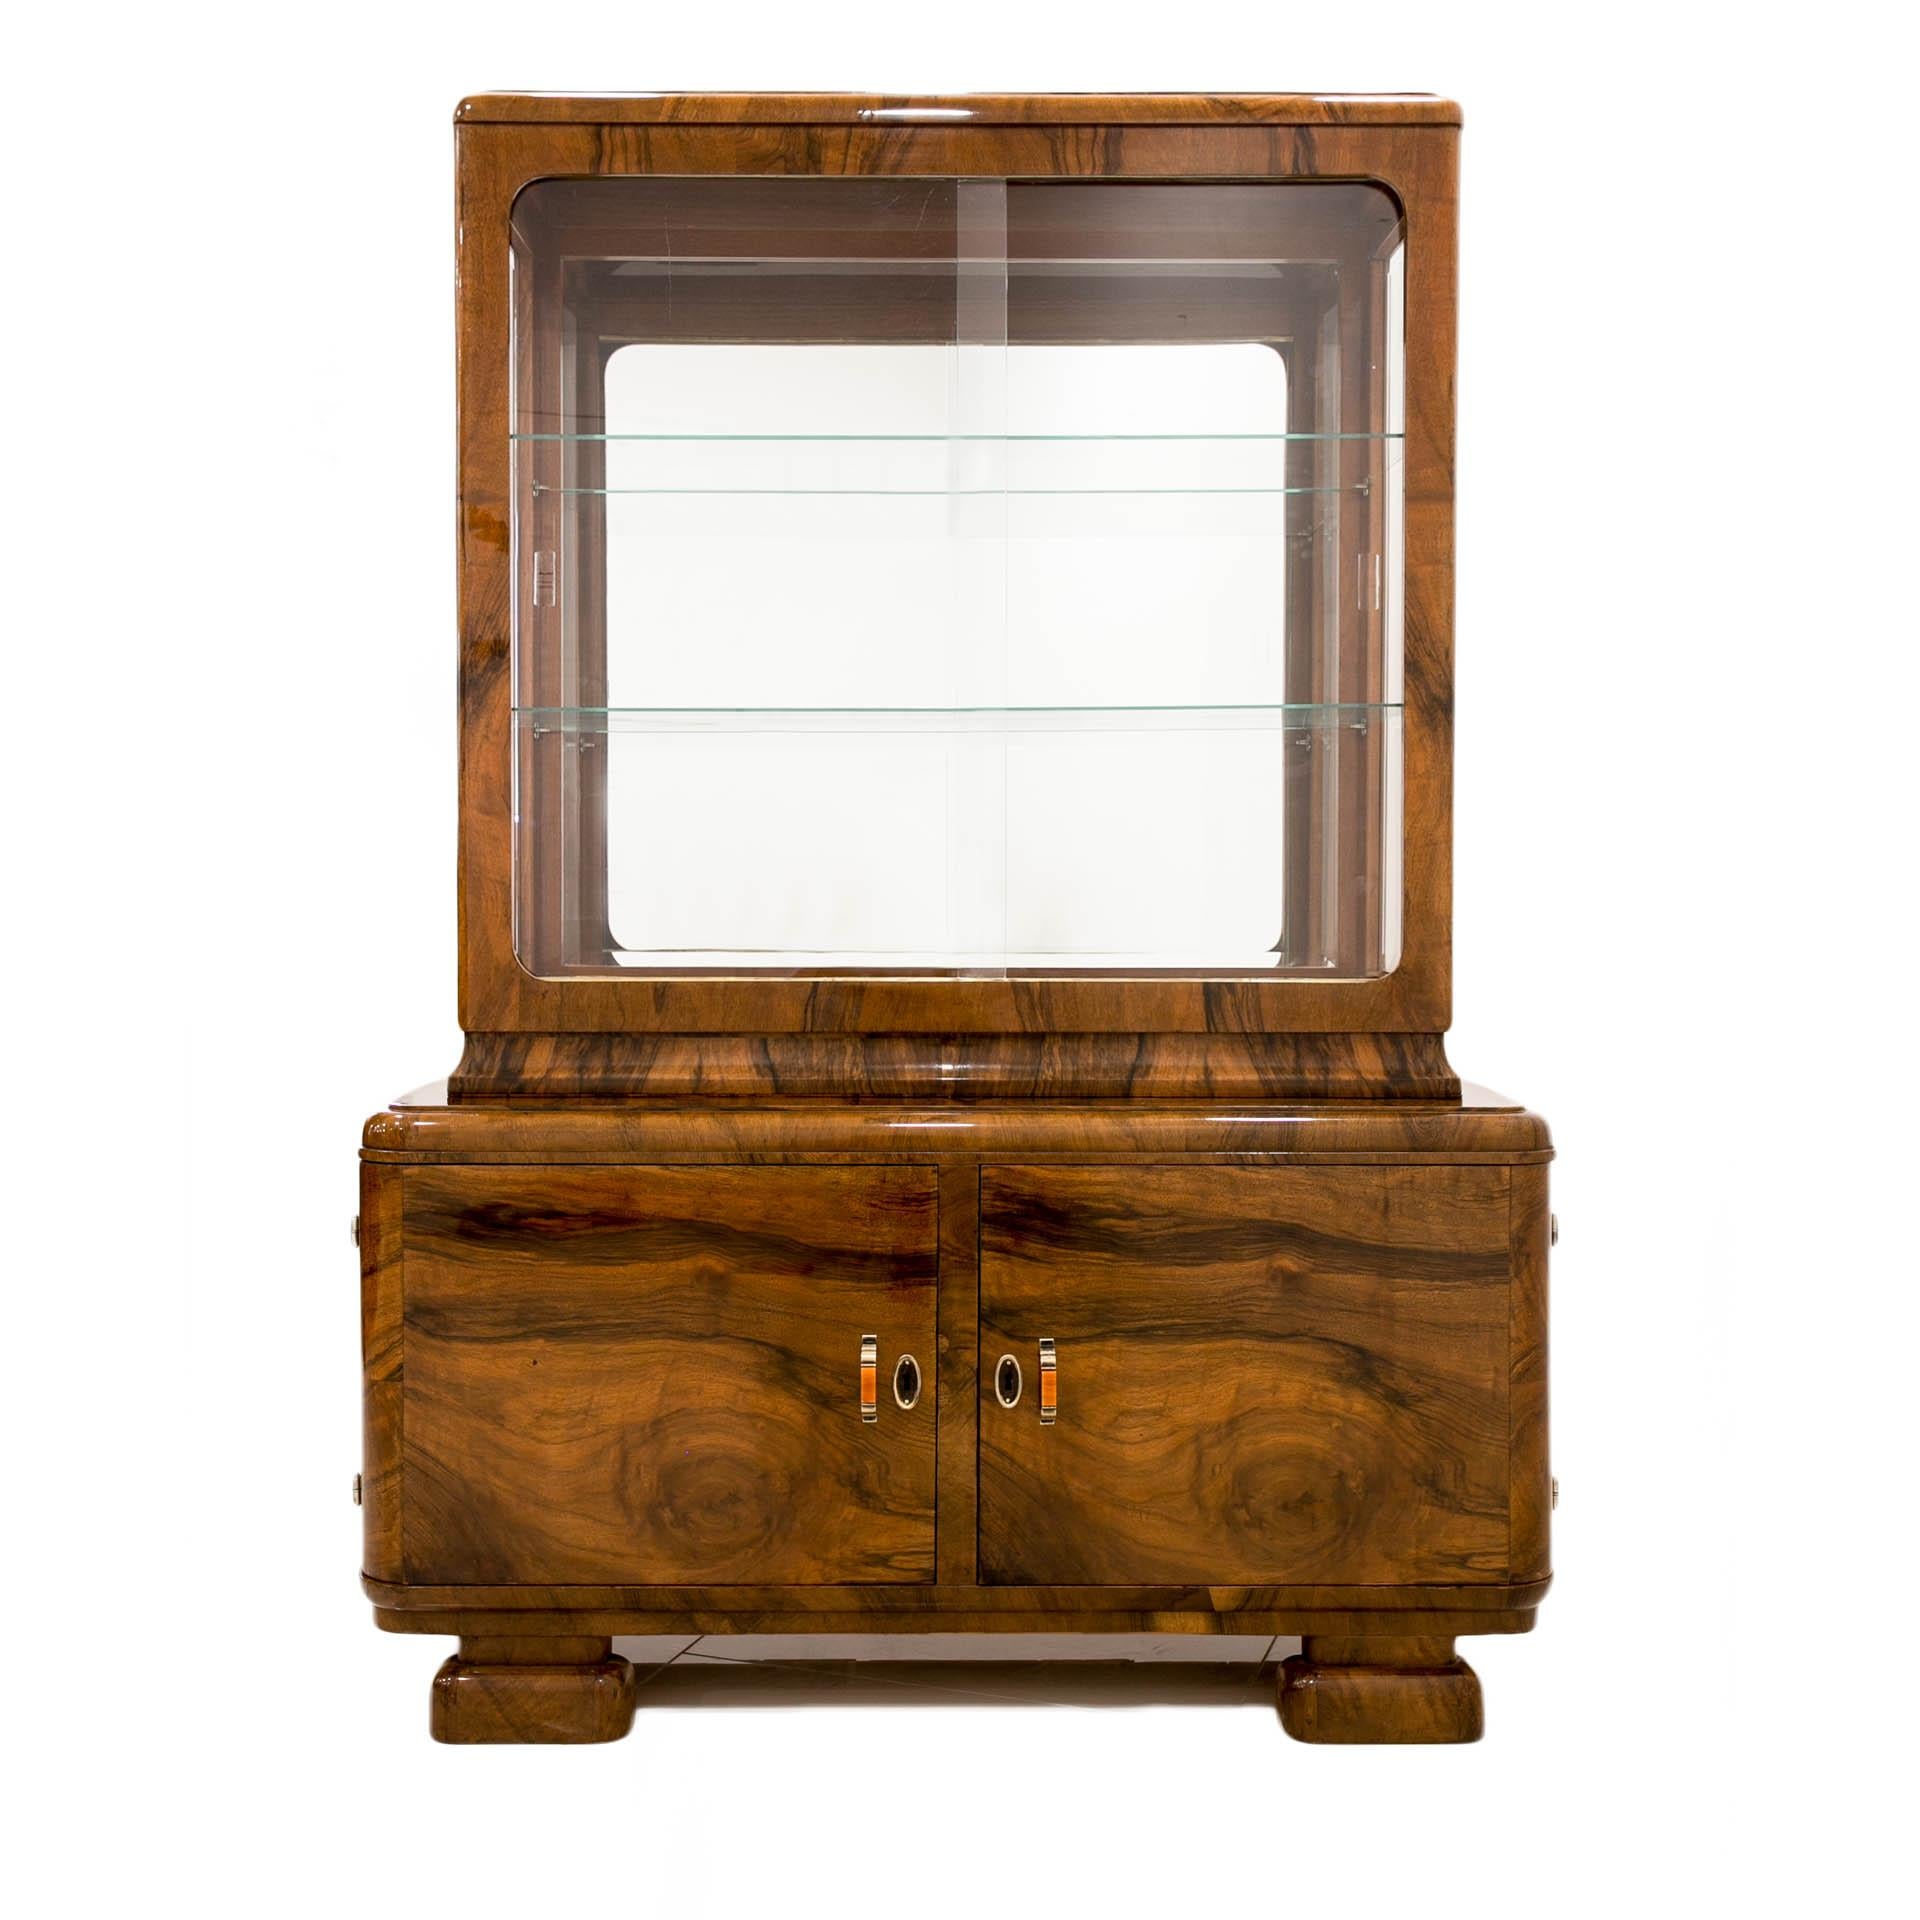 This beautiful Art Deco display cabinet comes from Poland and was made circa first half of 20th century. The structure is made of coniferous wood, veneered with beautiful walnut veneer. The piece is after professional renovation and is in excellent